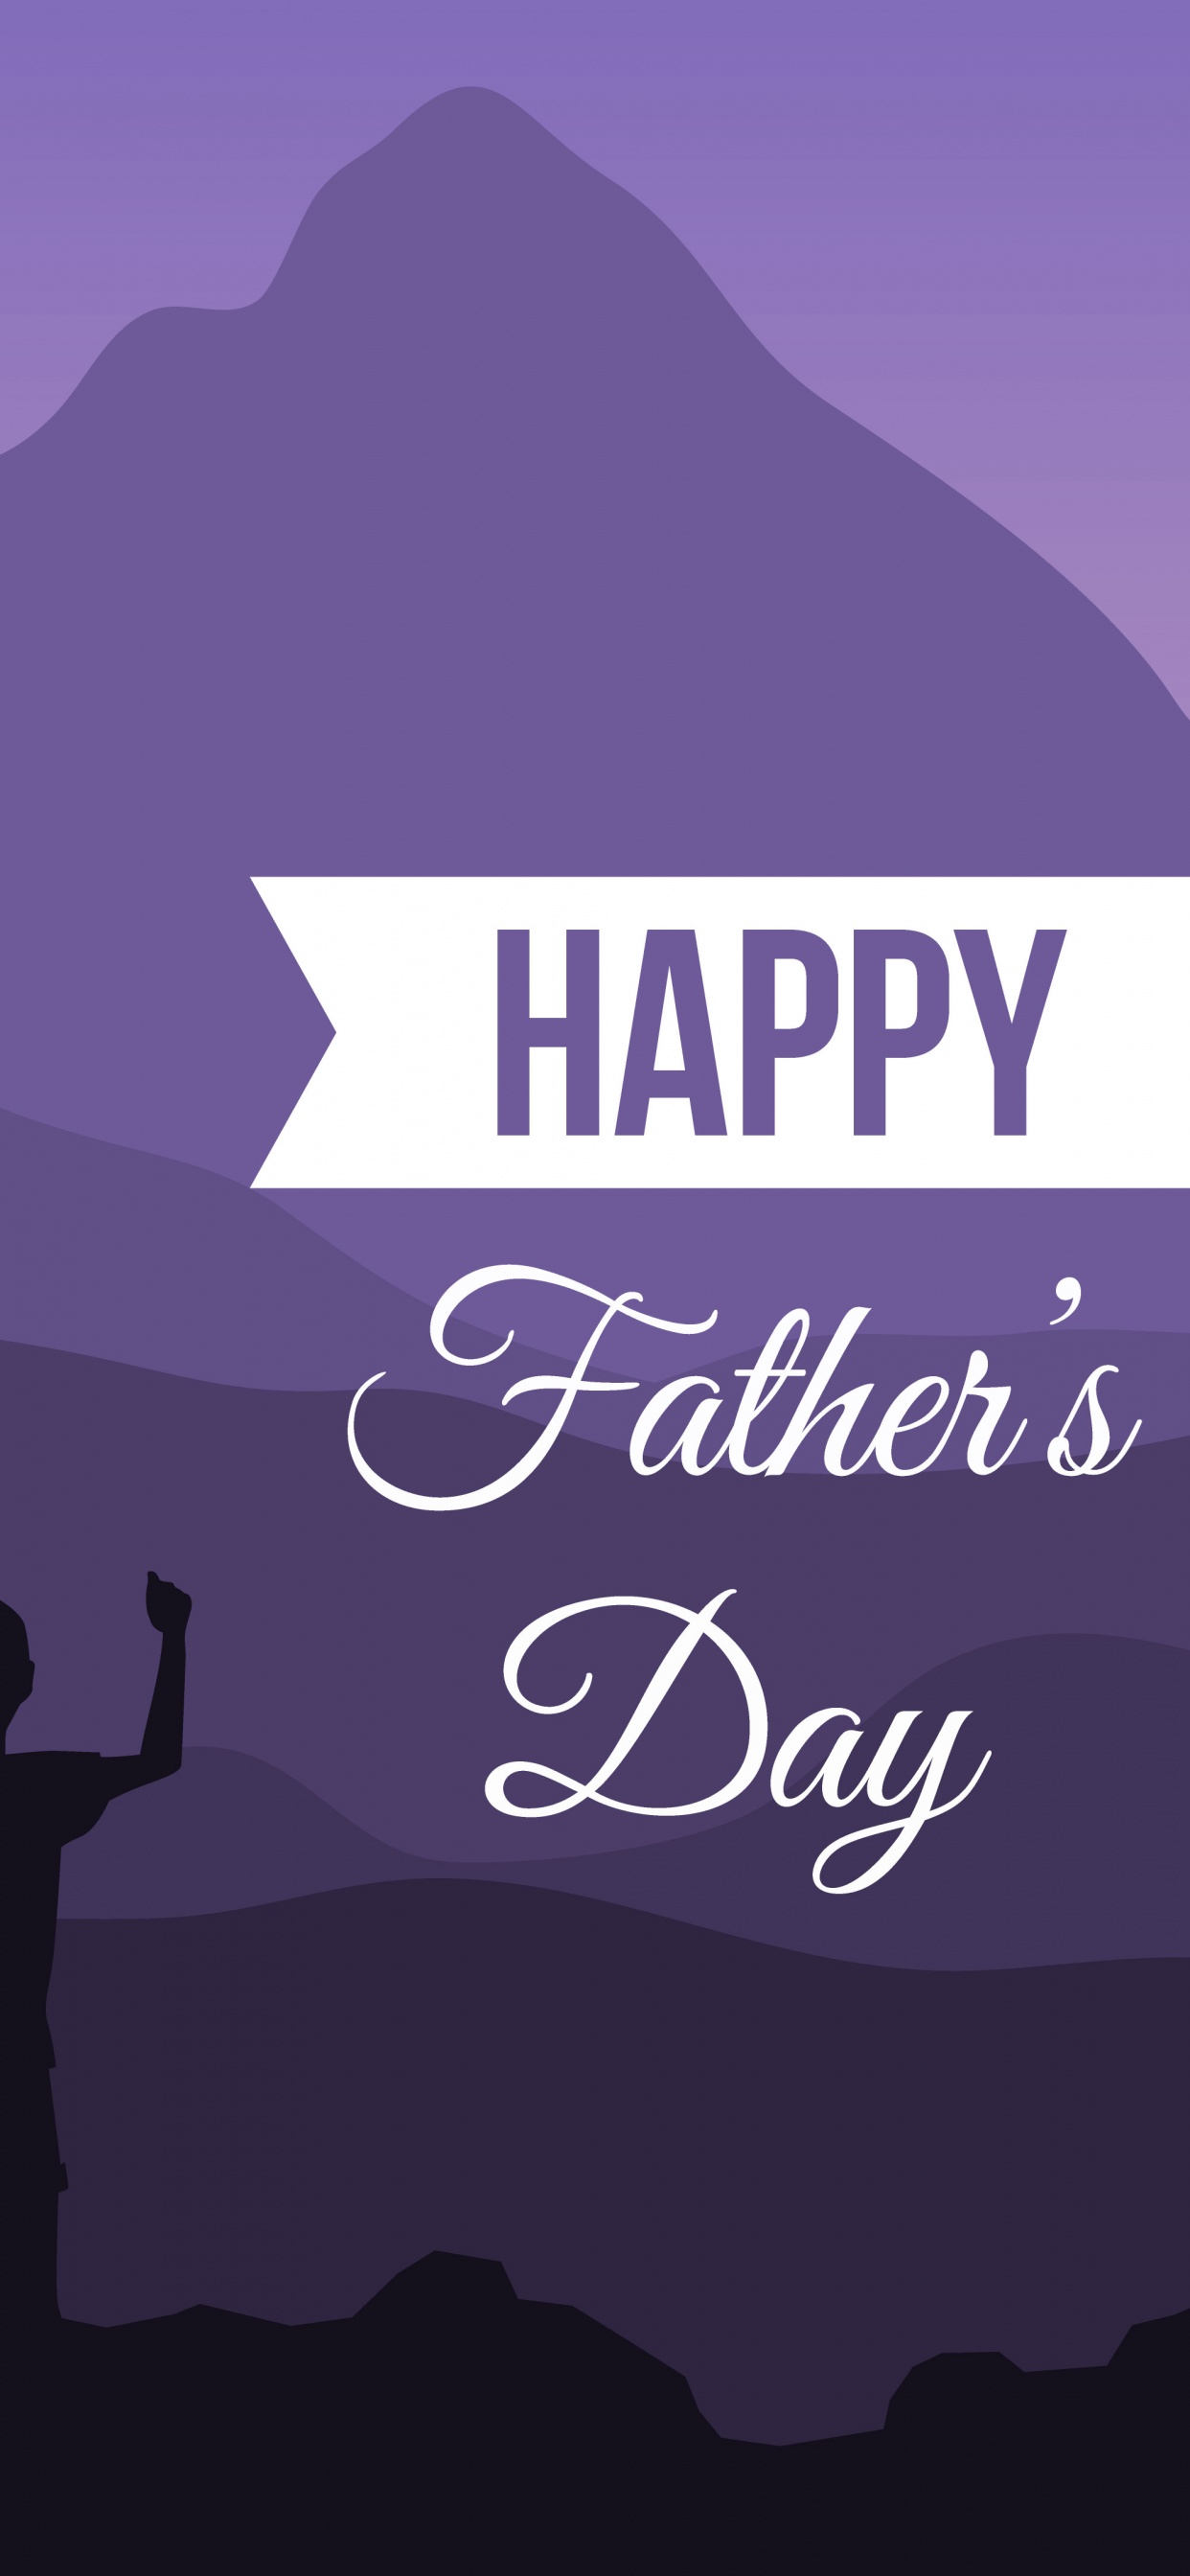 Happy Fathers Day Wishes Images Download 2020 Wishes Quotes Status  Messages Photos Pics HD Wallpapers